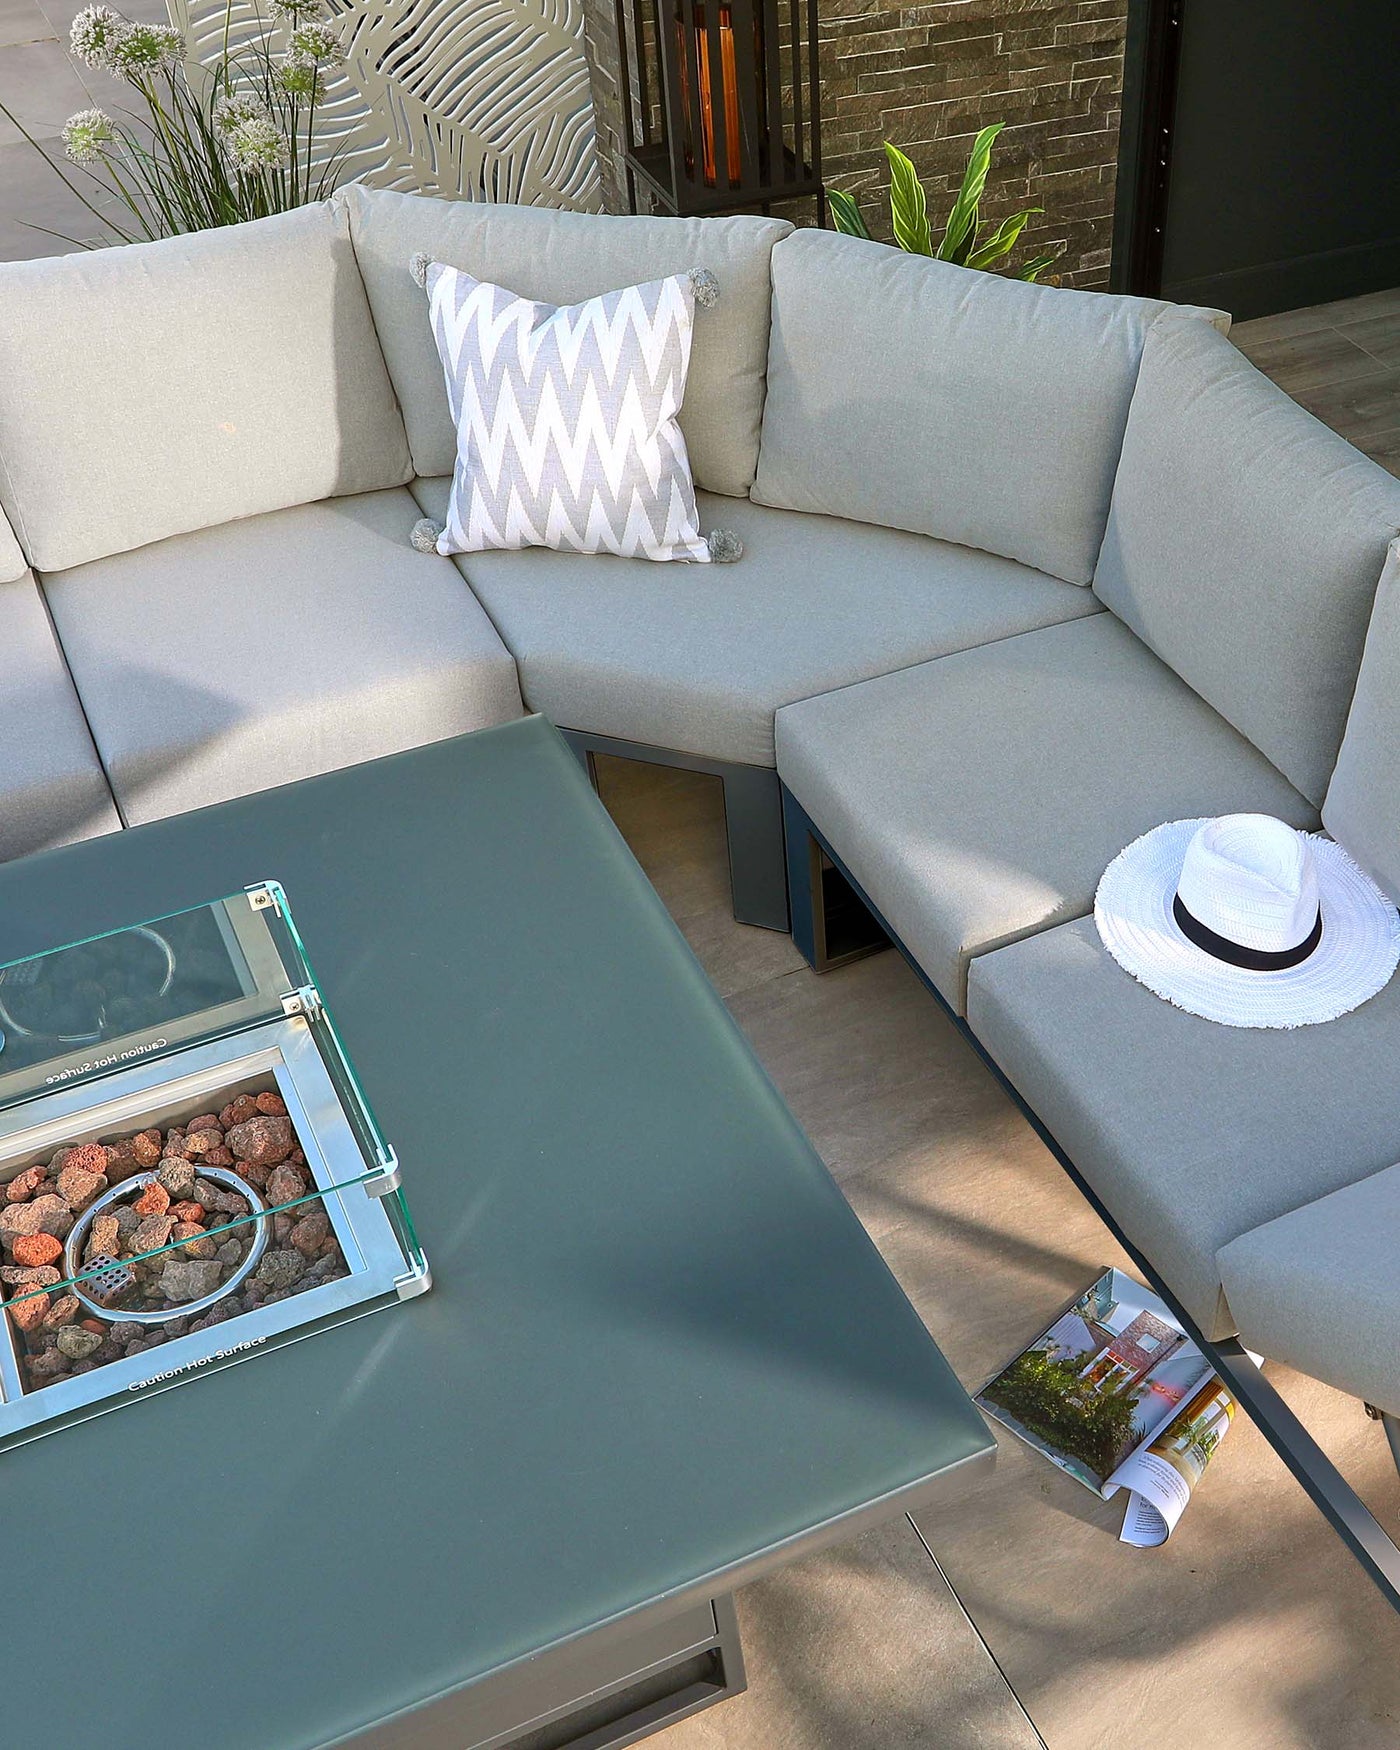 A modern outdoor corner sectional sofa in a light grey fabric with clean lines and minimalistic style, complemented by a matching low-profile coffee table with a frosted glass display compartment filled with decorative stones. The set is accessorized with a patterned throw pillow, a casual white sun hat, and a lifestyle magazine, arranged on a balcony with potted plants and a textured wall as a backdrop.